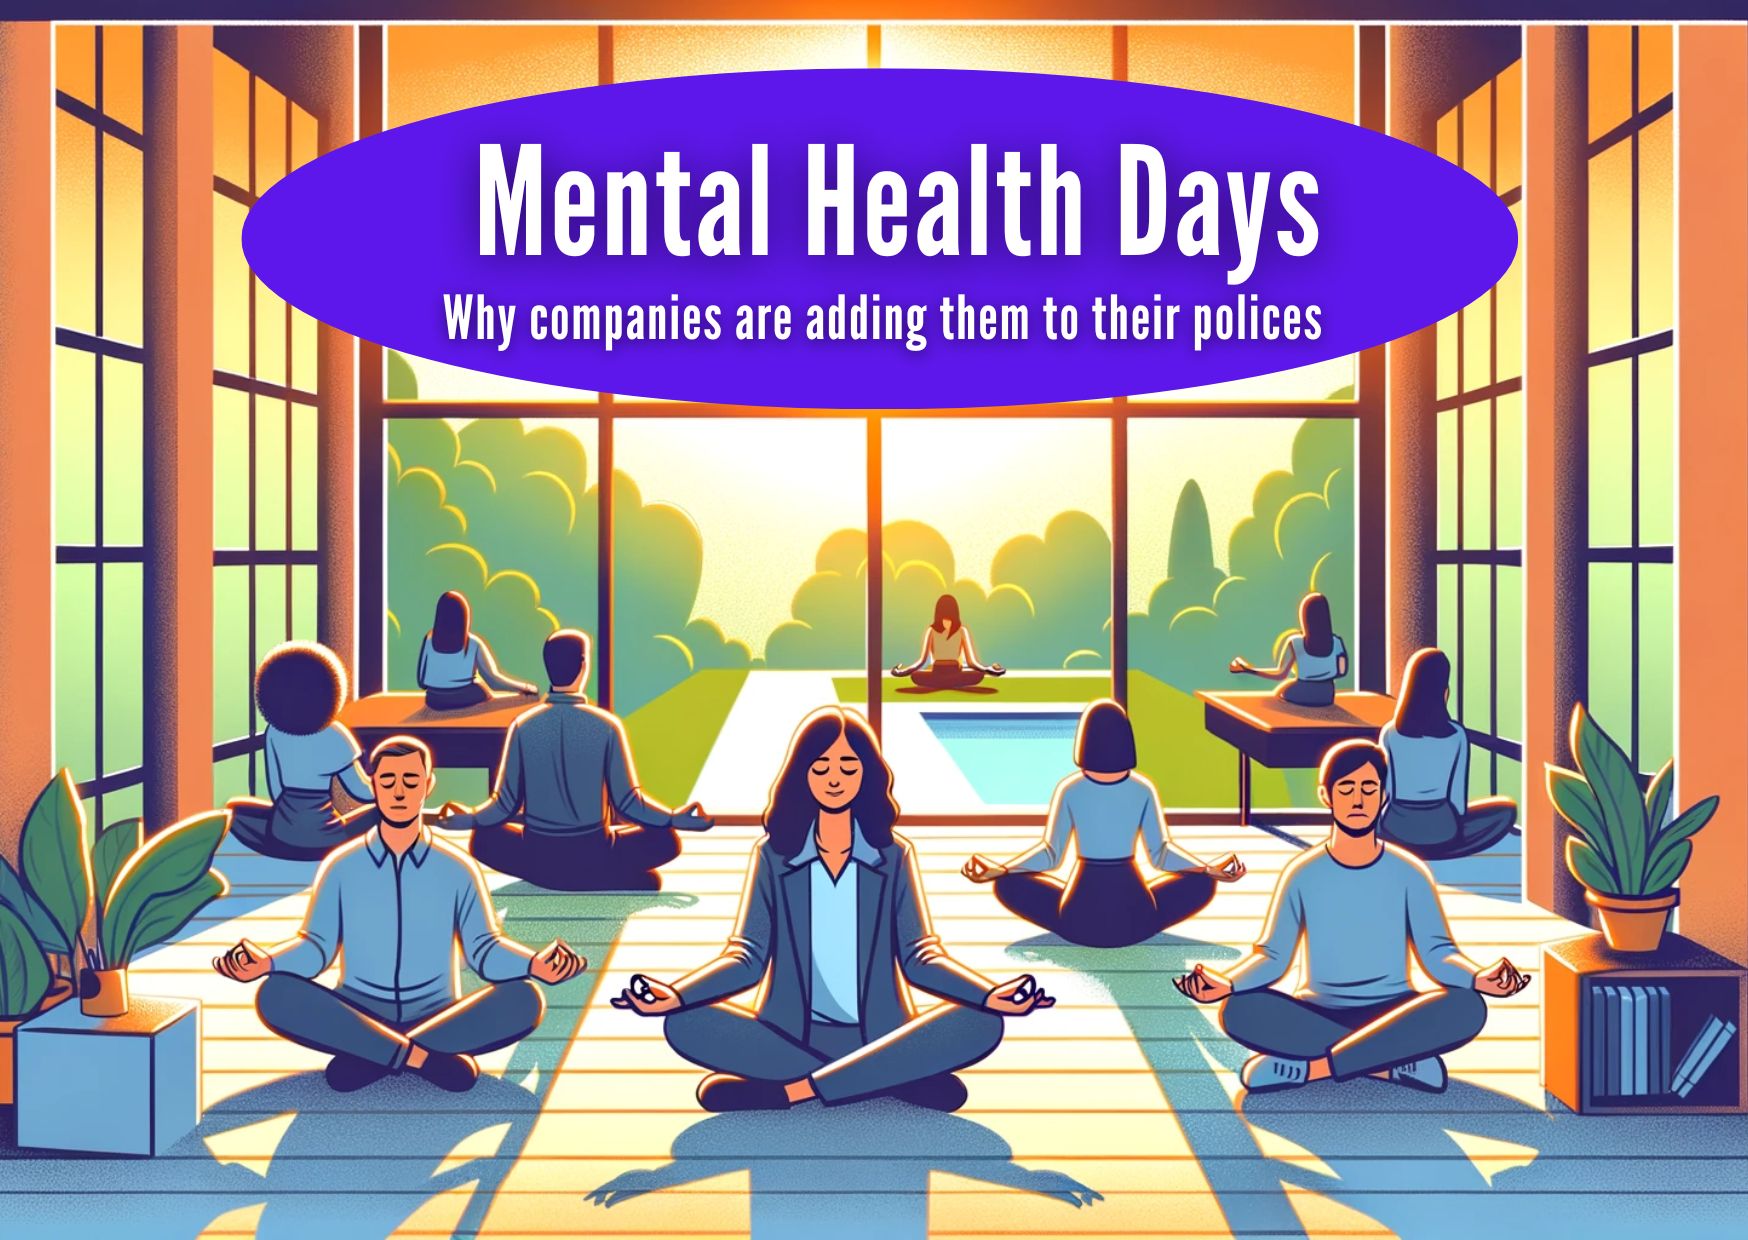 Illustration of diverse employees meditating and relaxing in a spacious office with text saying mental health days